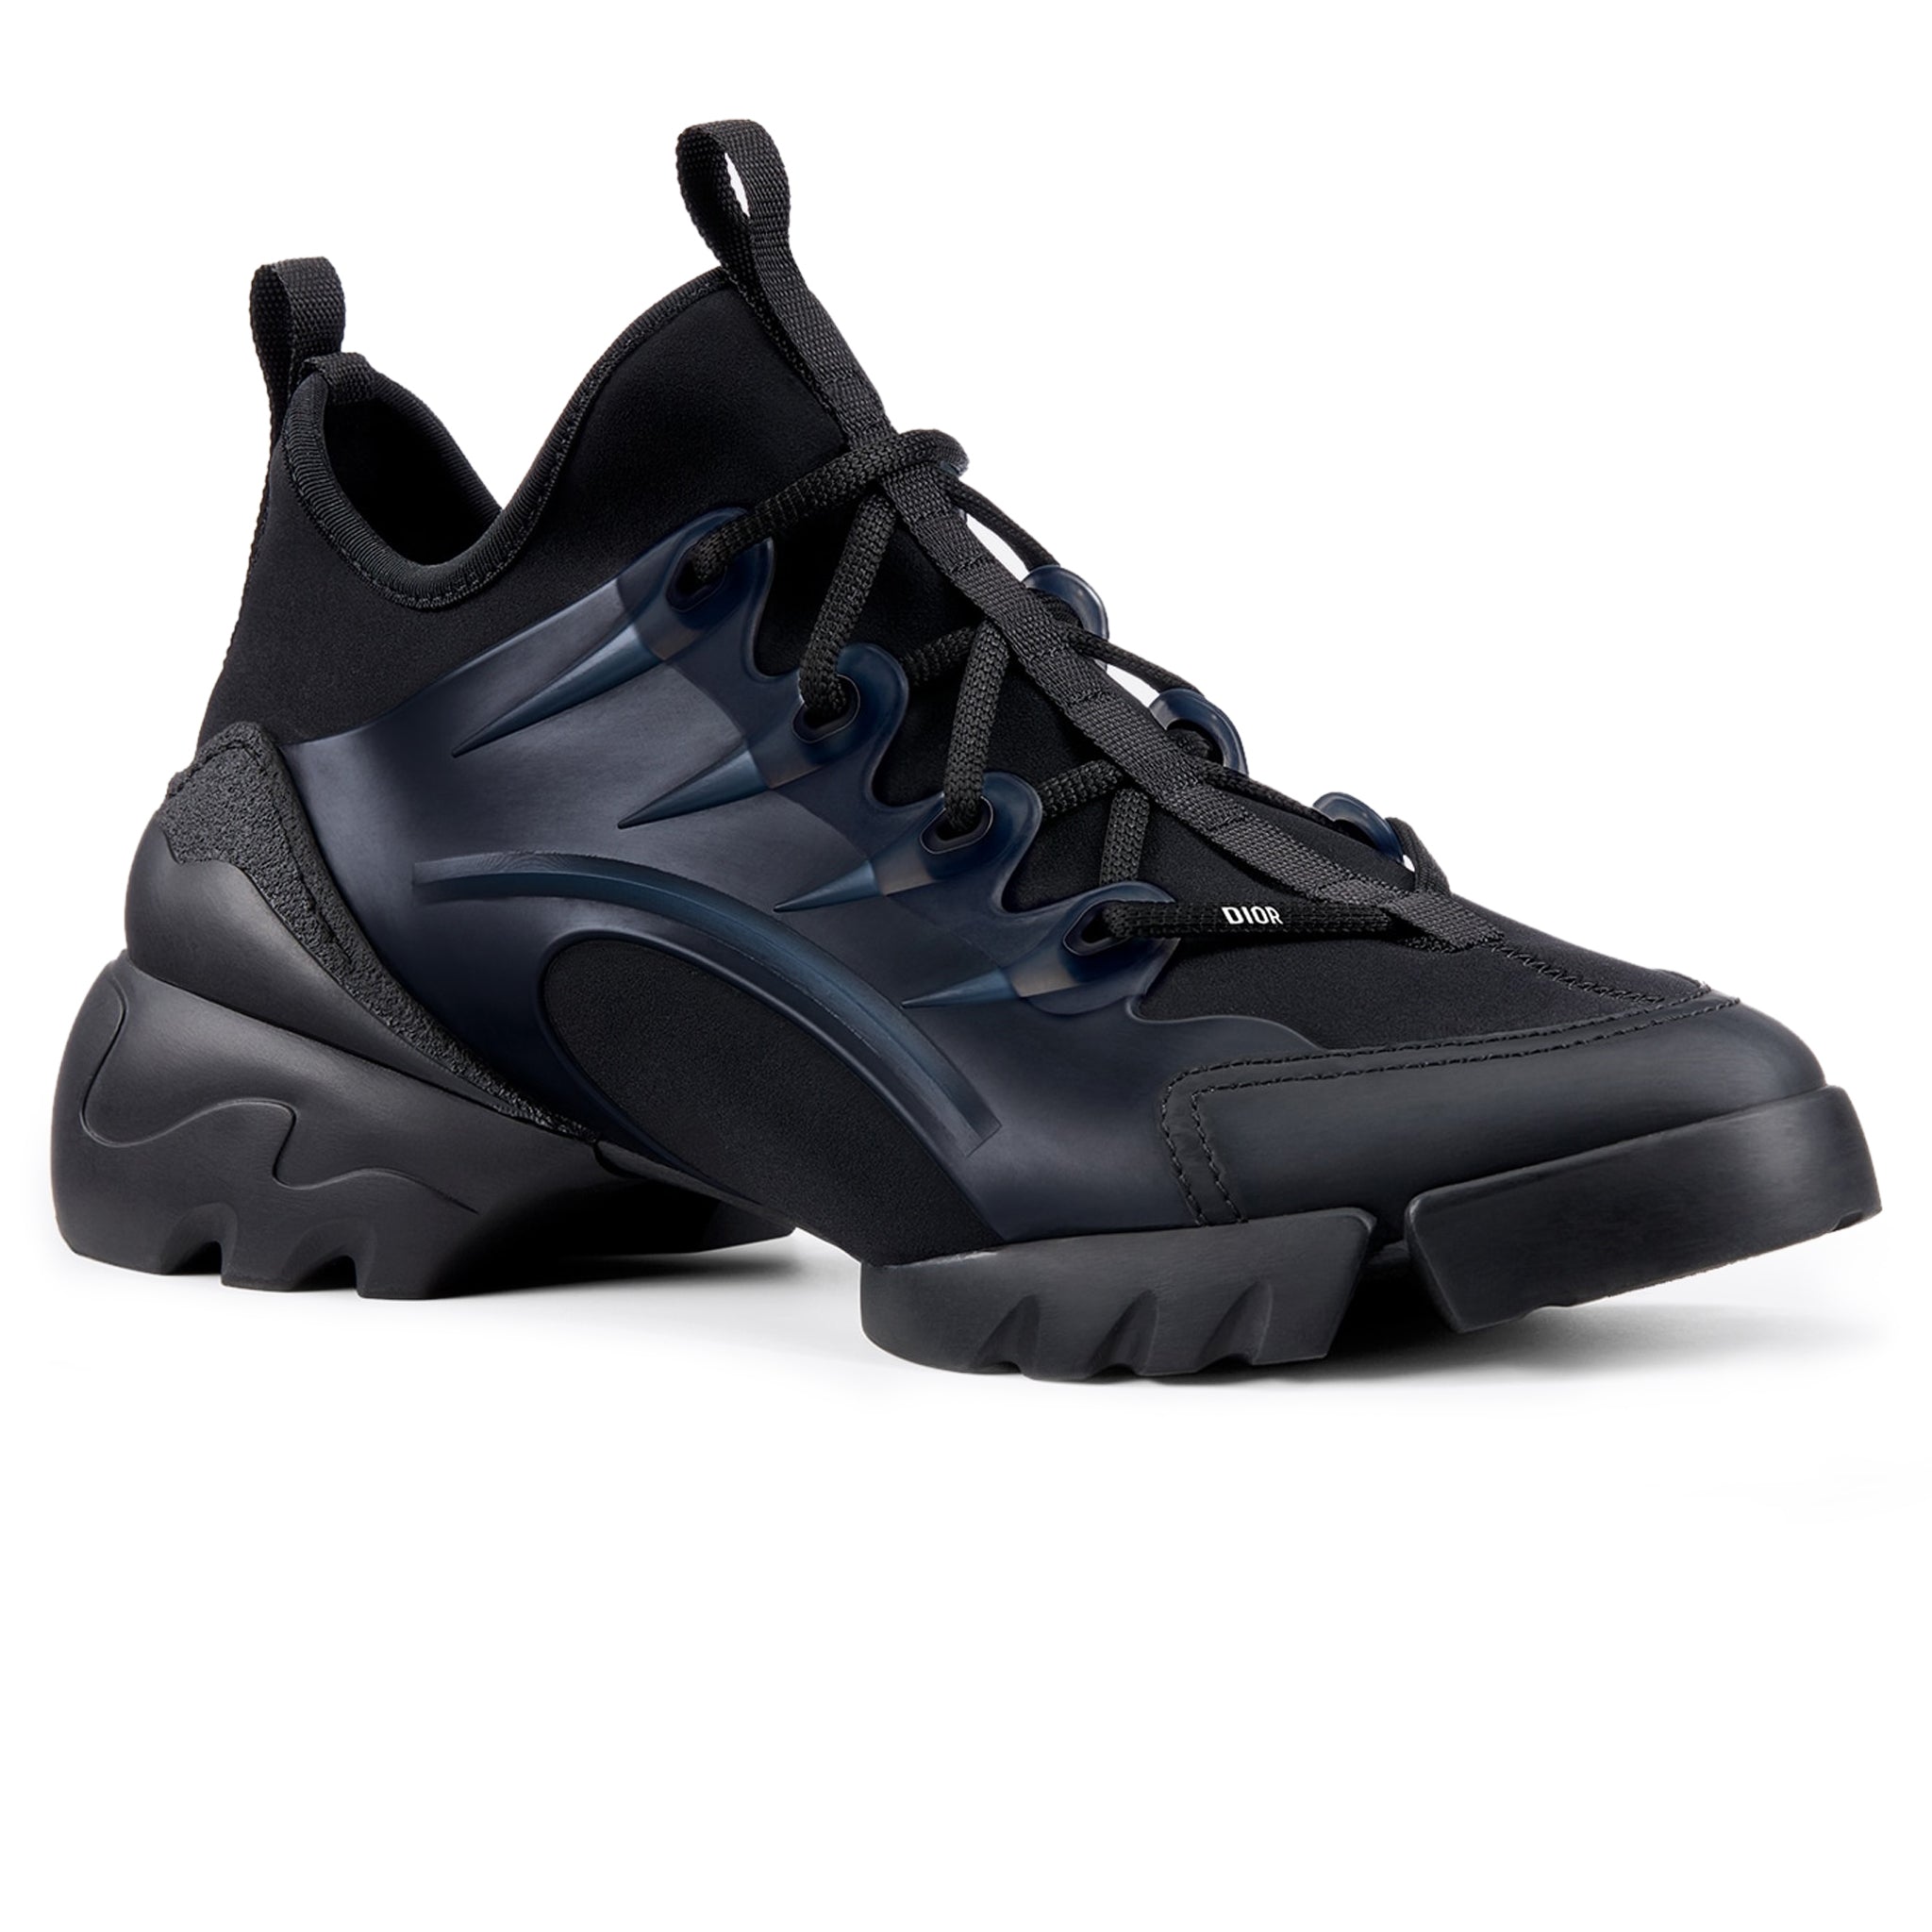 DConnect Sneaker Black Technical Fabric  DIOR GR